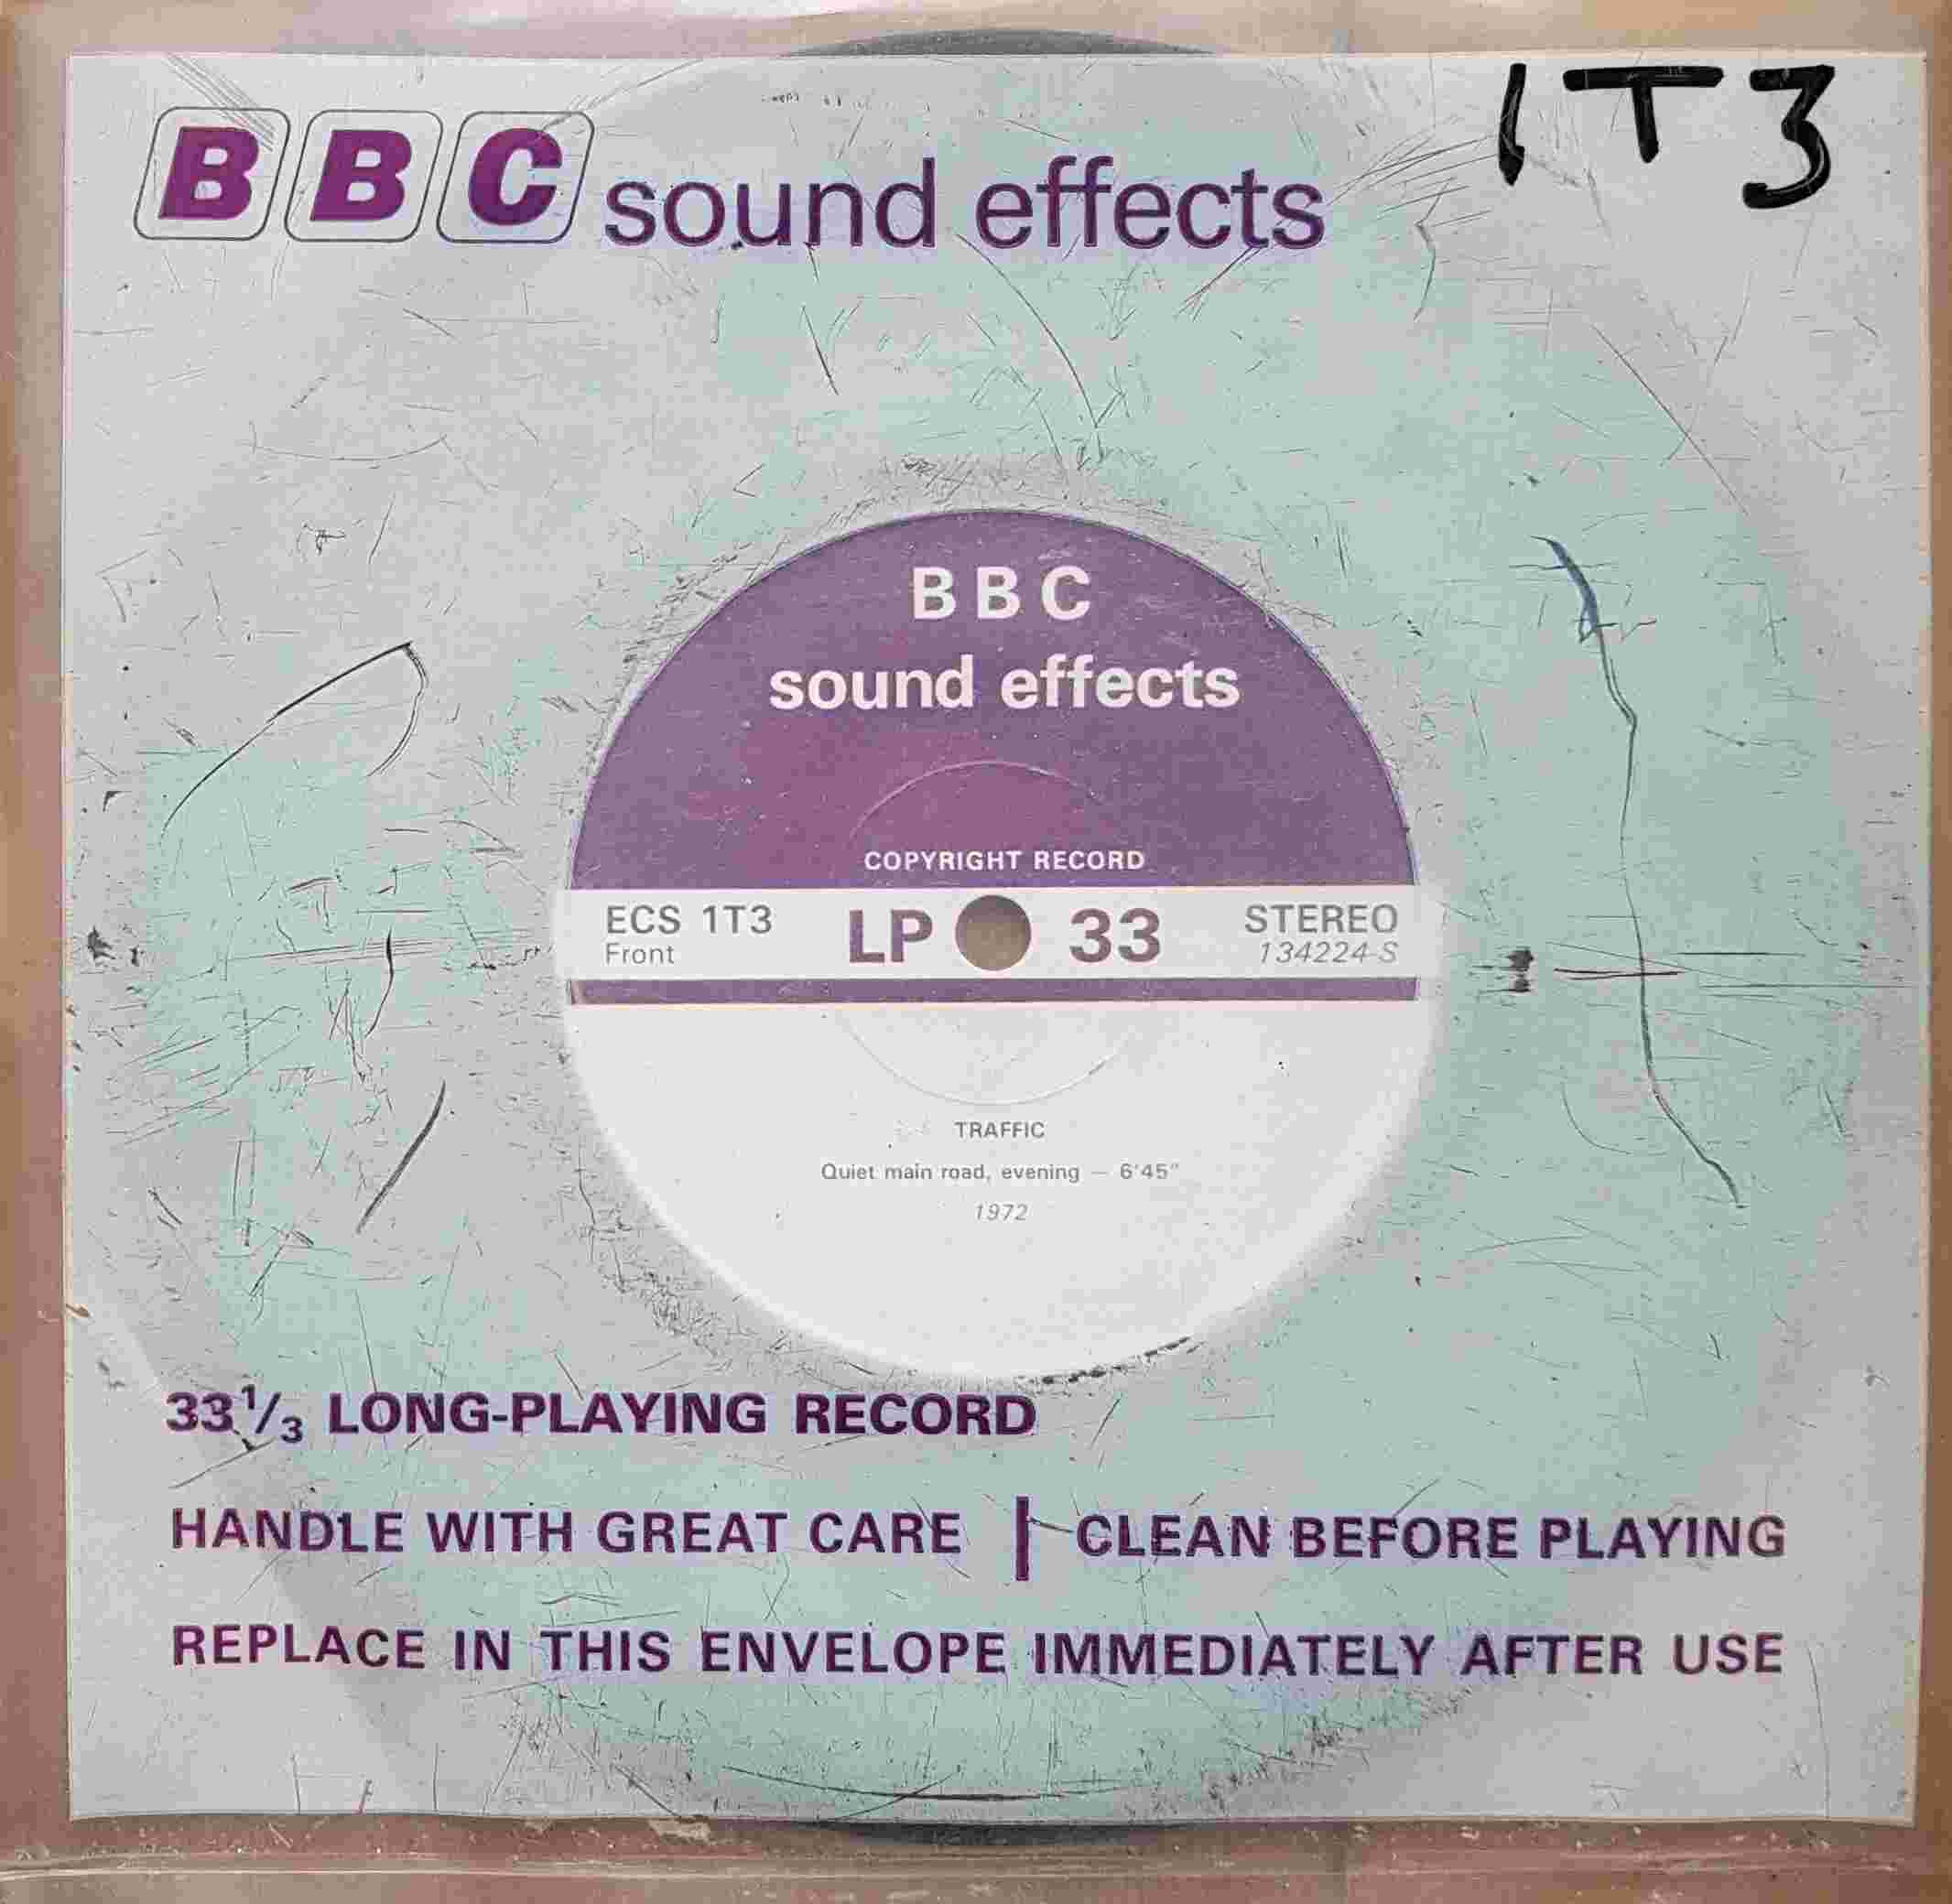 Picture of ECS 1T3 Traffic by artist Not registered from the BBC singles - Records and Tapes library